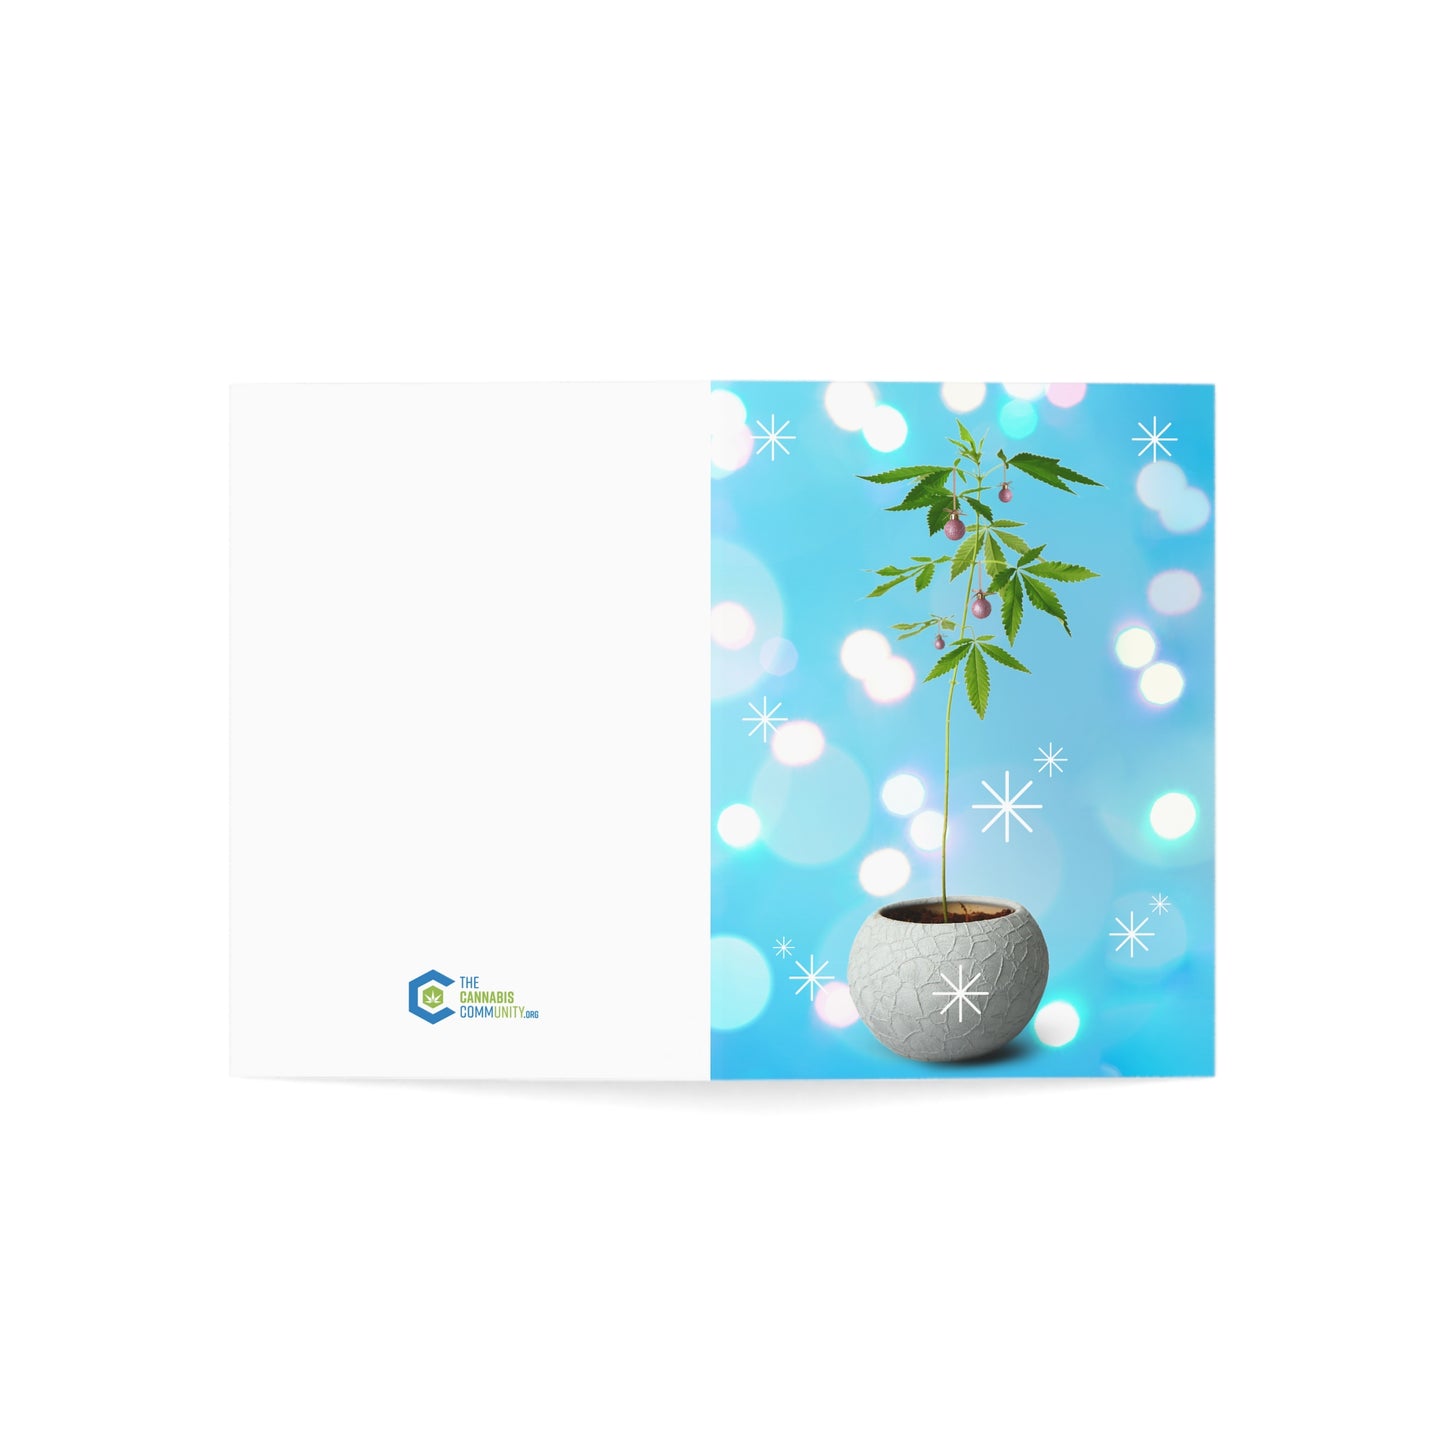 Potted Christmas Marijuana Plant Merry Christmas Greeting Cards (1, 10, 30, and 50pcs)